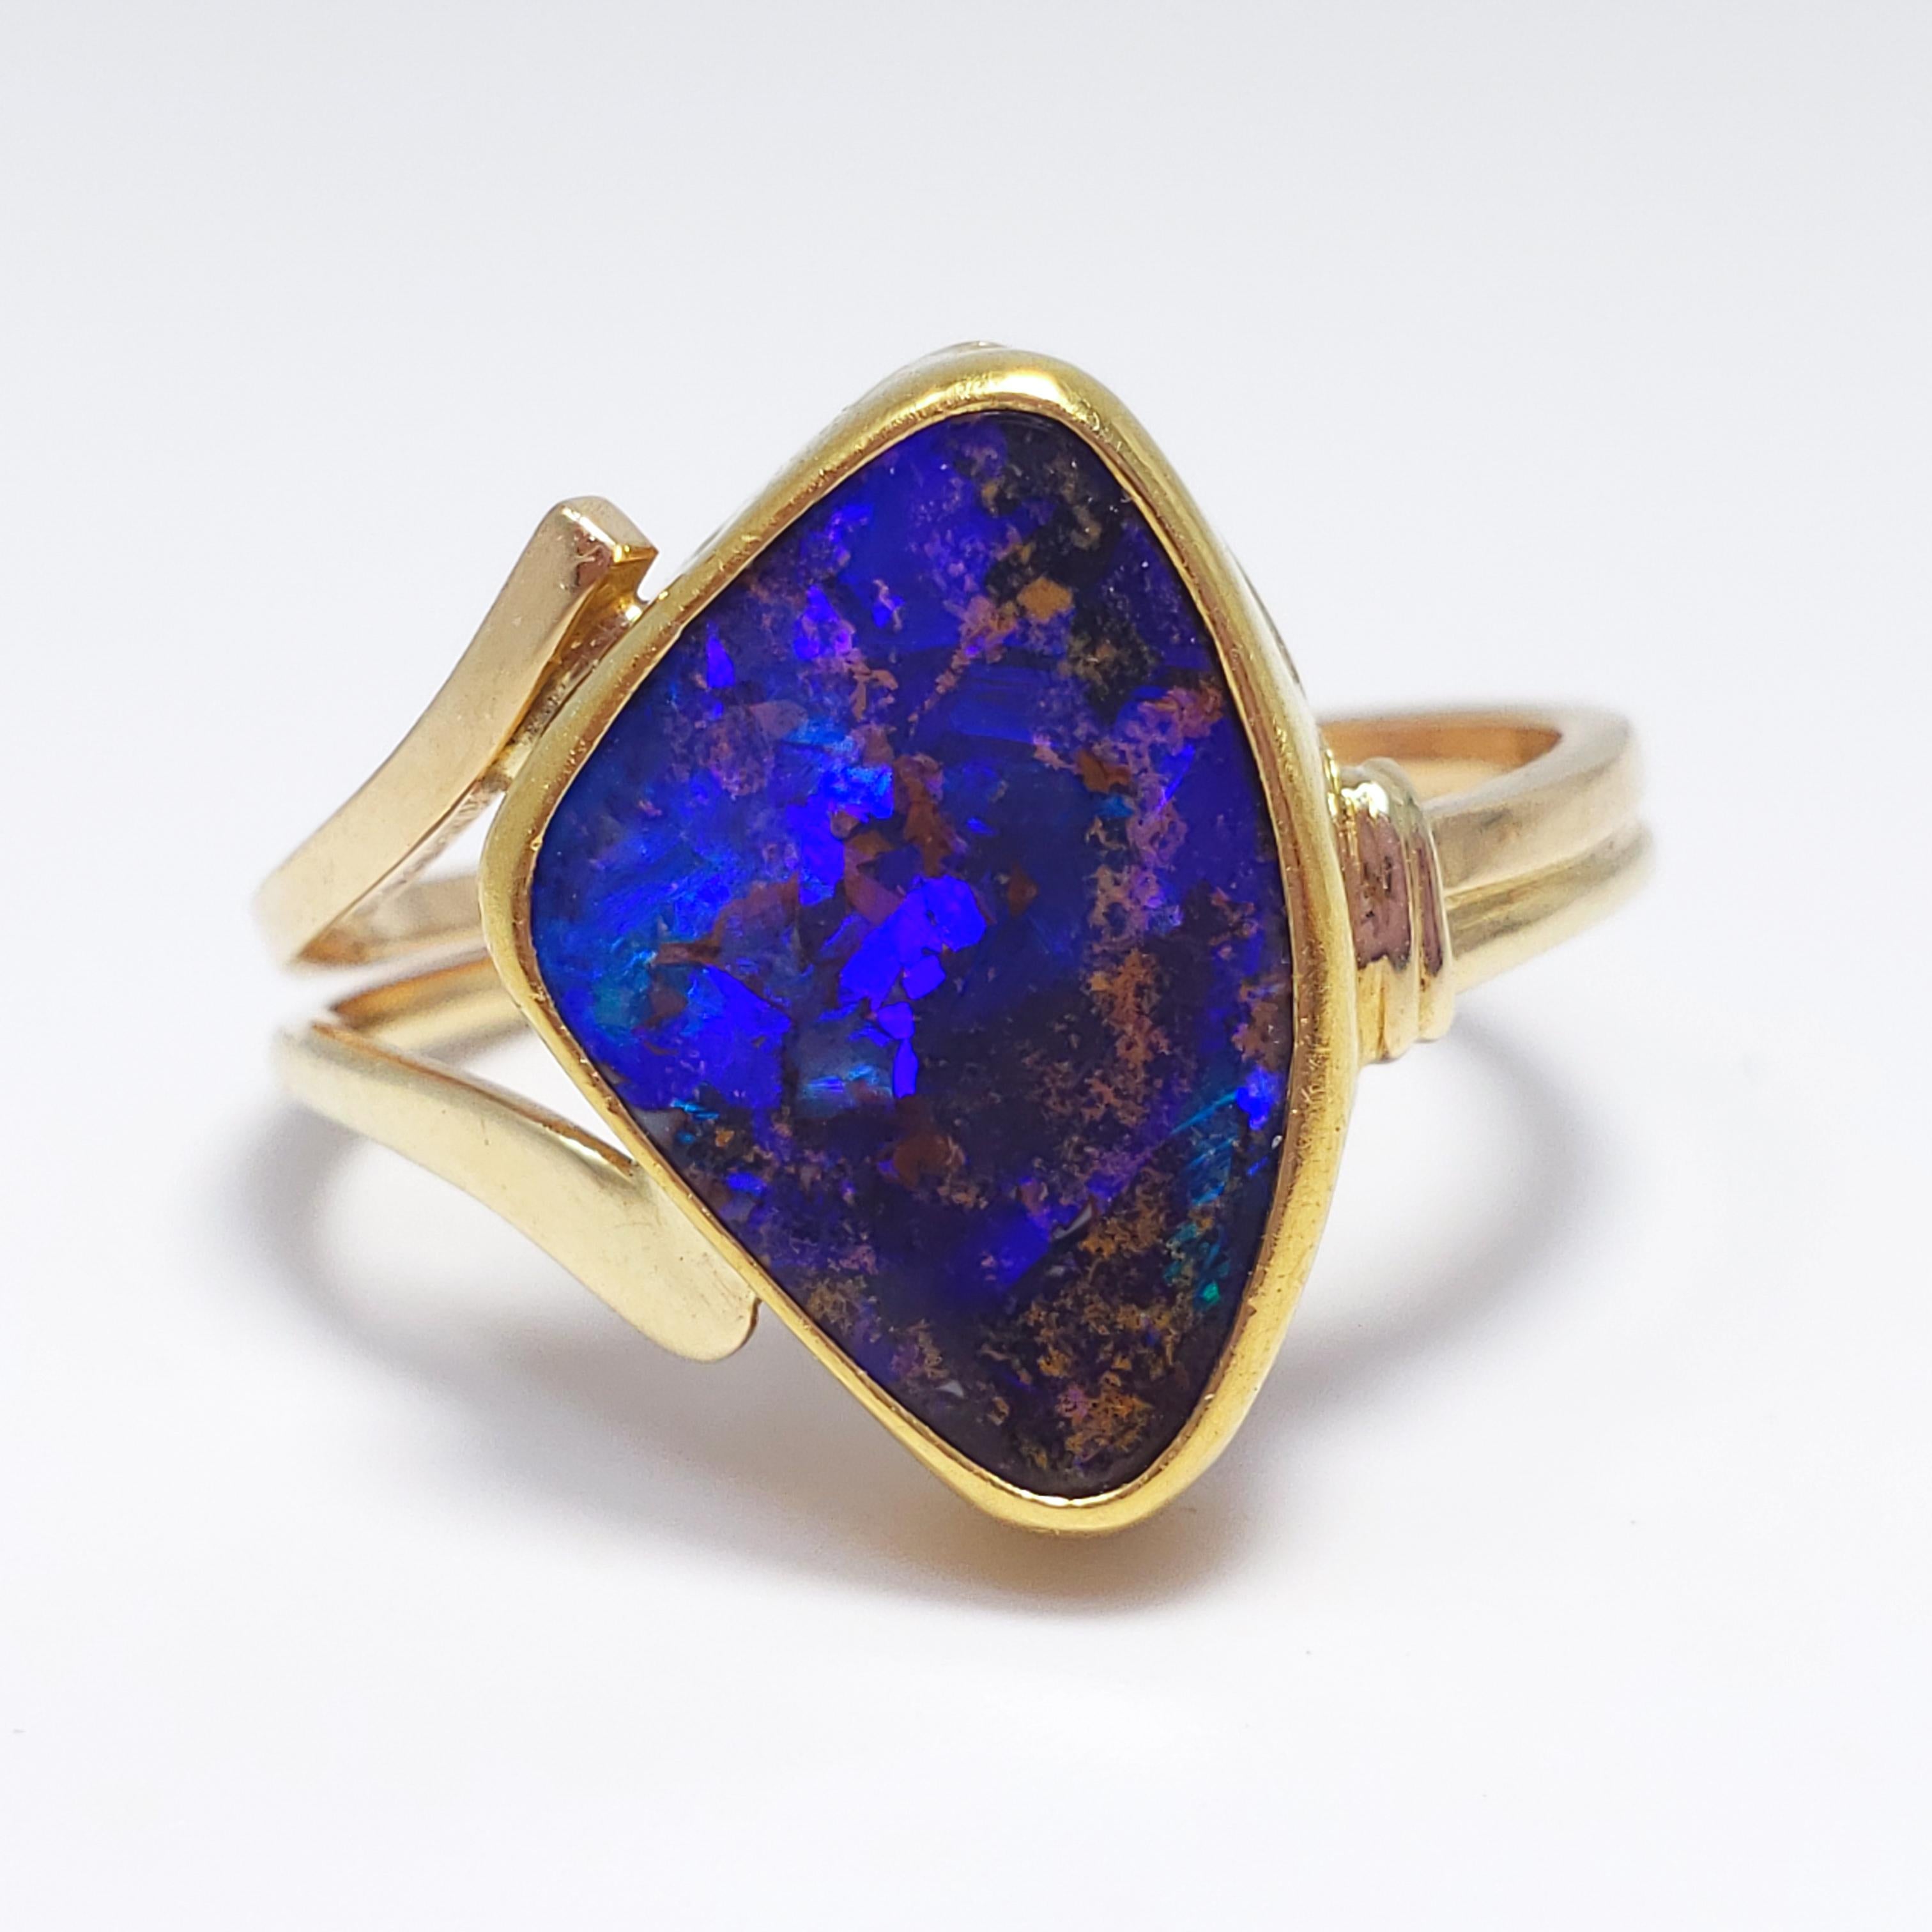 A gorgeous opal in a unique cut! This statement cocktail ring features a custom-cut boulder opal with a mesmerizing, blue, black, and purple play of color in the body. Set in a decorative 22K bezel, connected with a 14K double band which separates